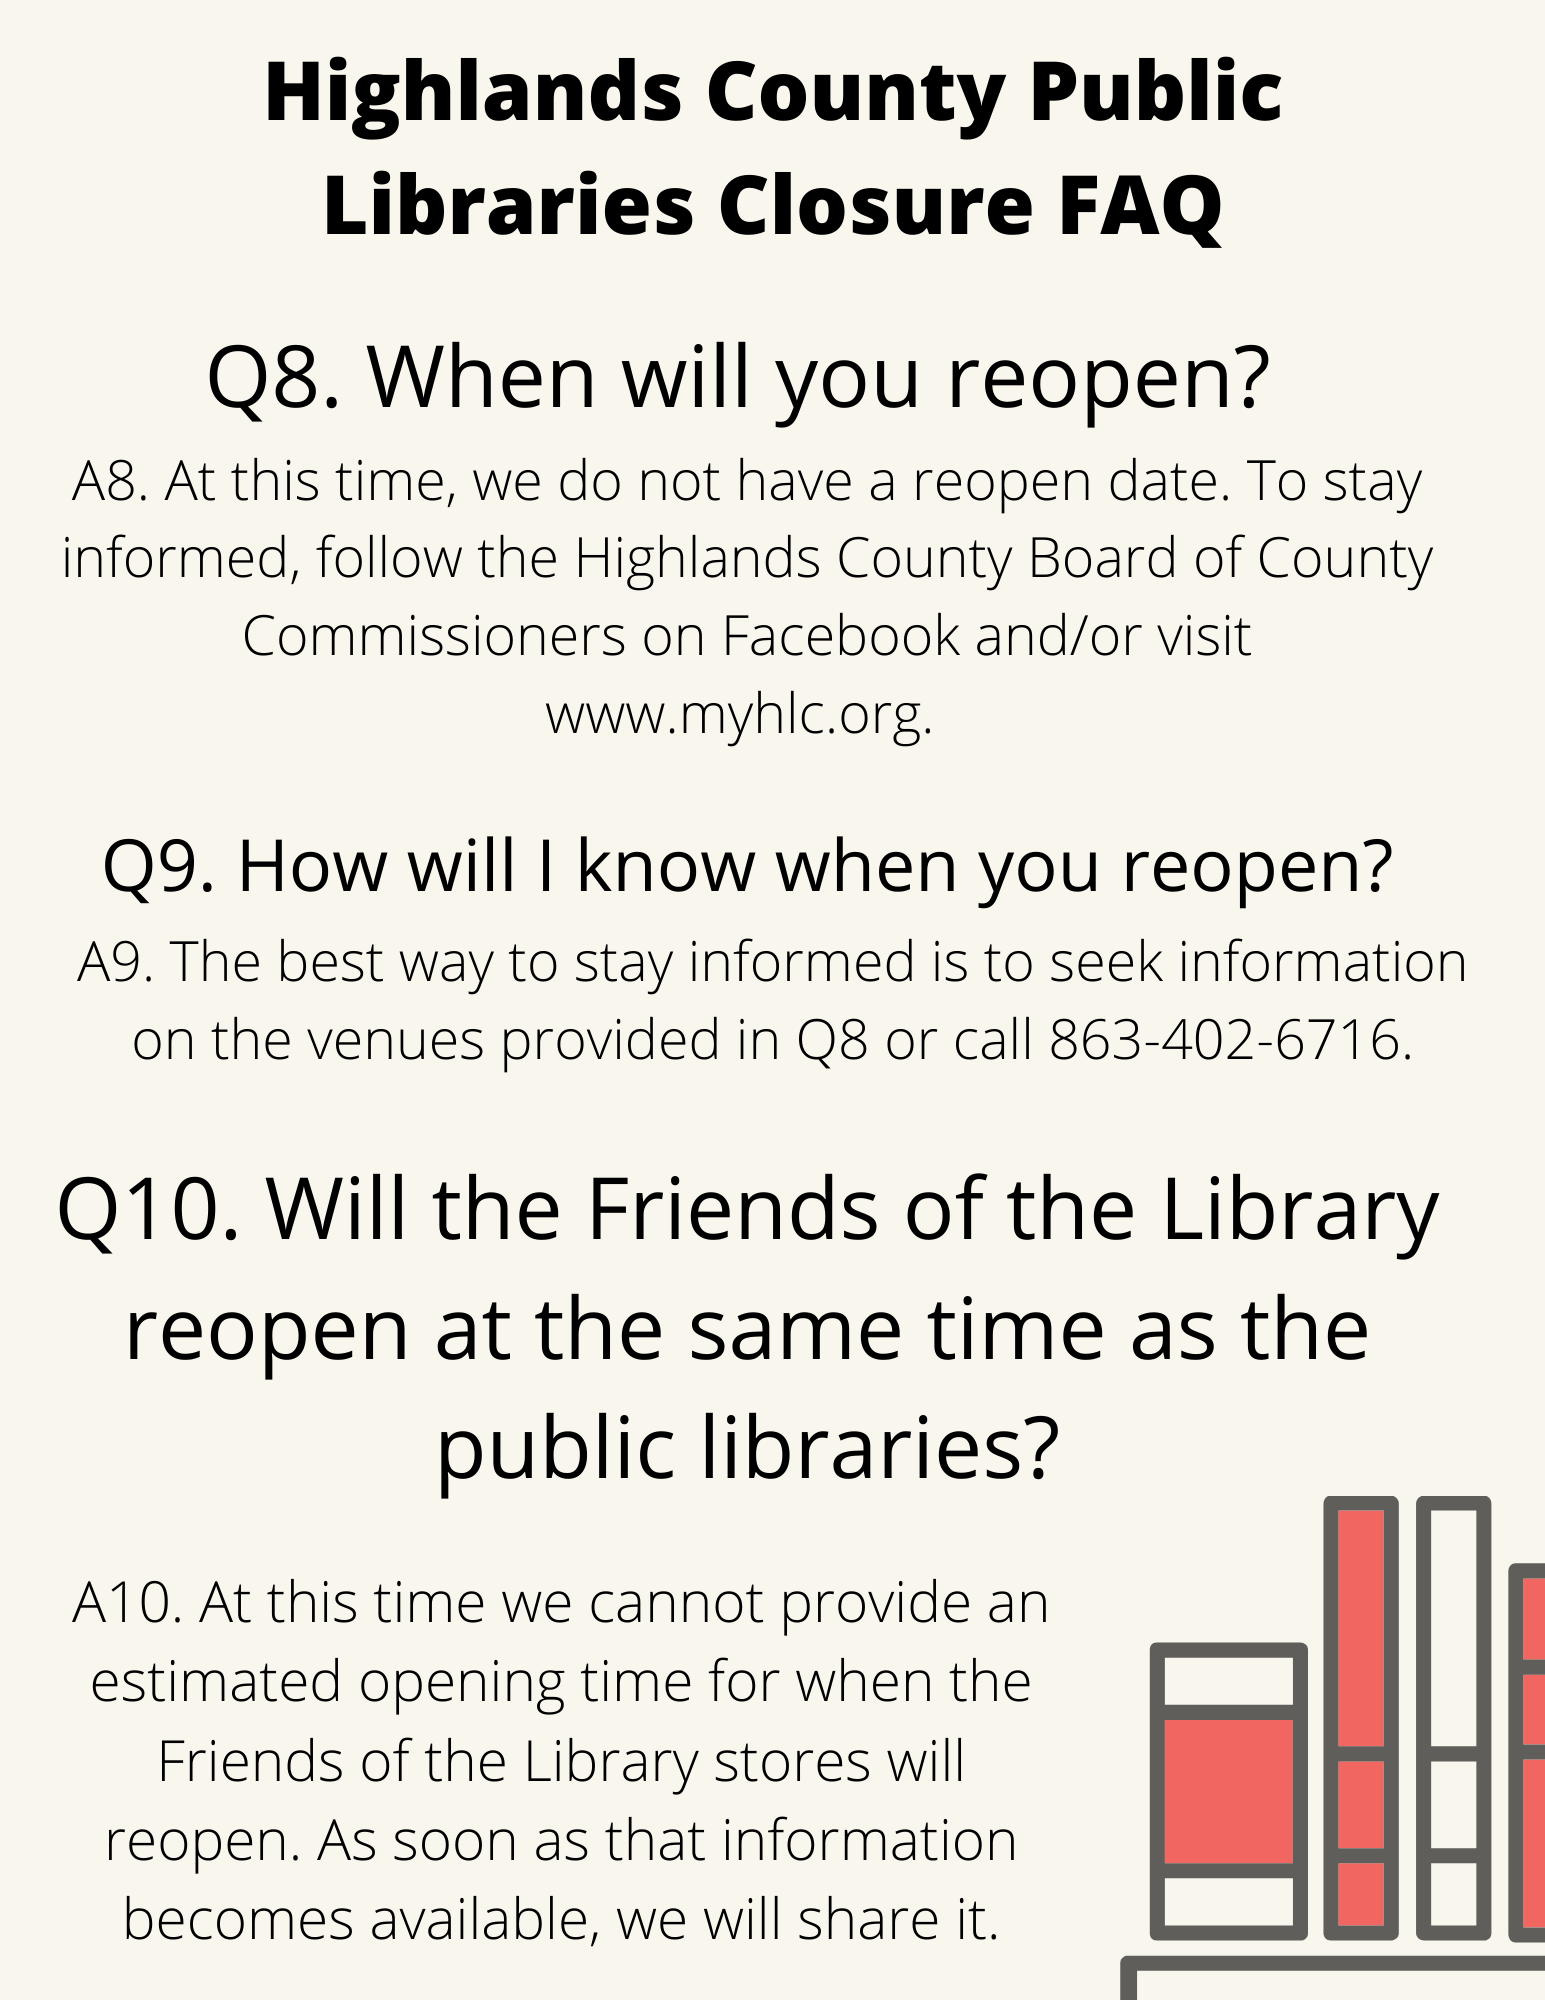 Highlands County patrons, please read for information regarding Highlands County libraries. For more information, call 863-402-6716. We are available to answer your questions, renew materials, and assistance accessing e-resources.